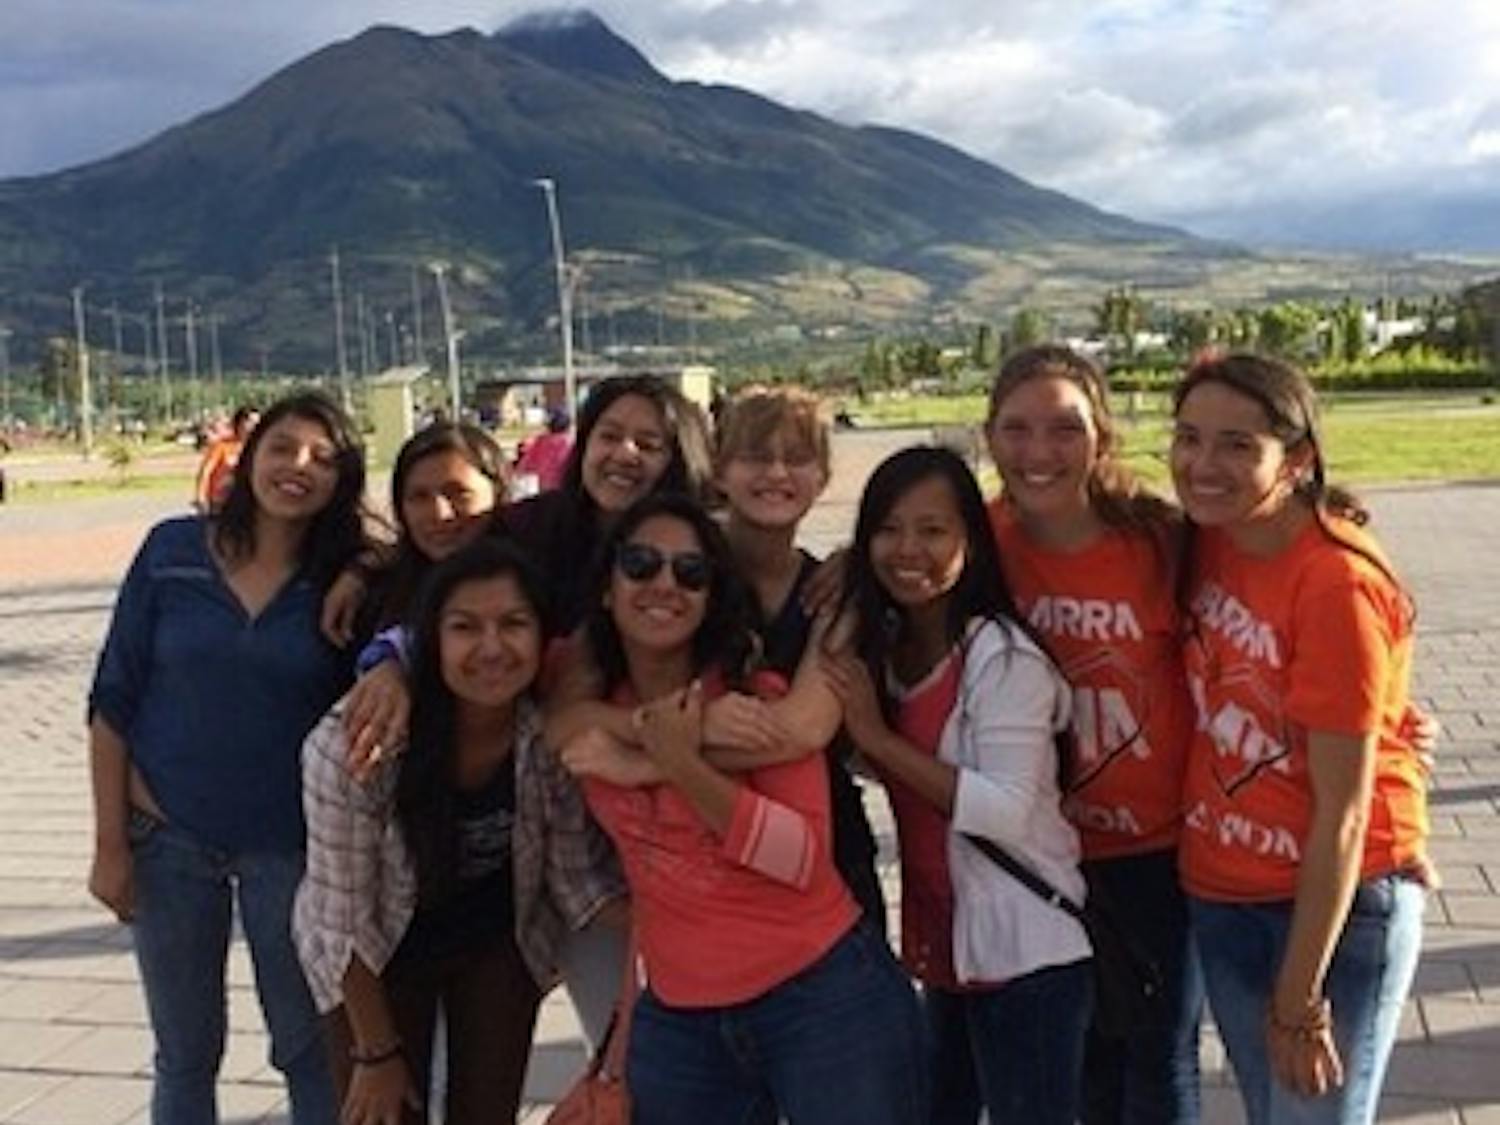 Lauren Farnsworth, center, poses with friends she made during her gap year in Ecuador